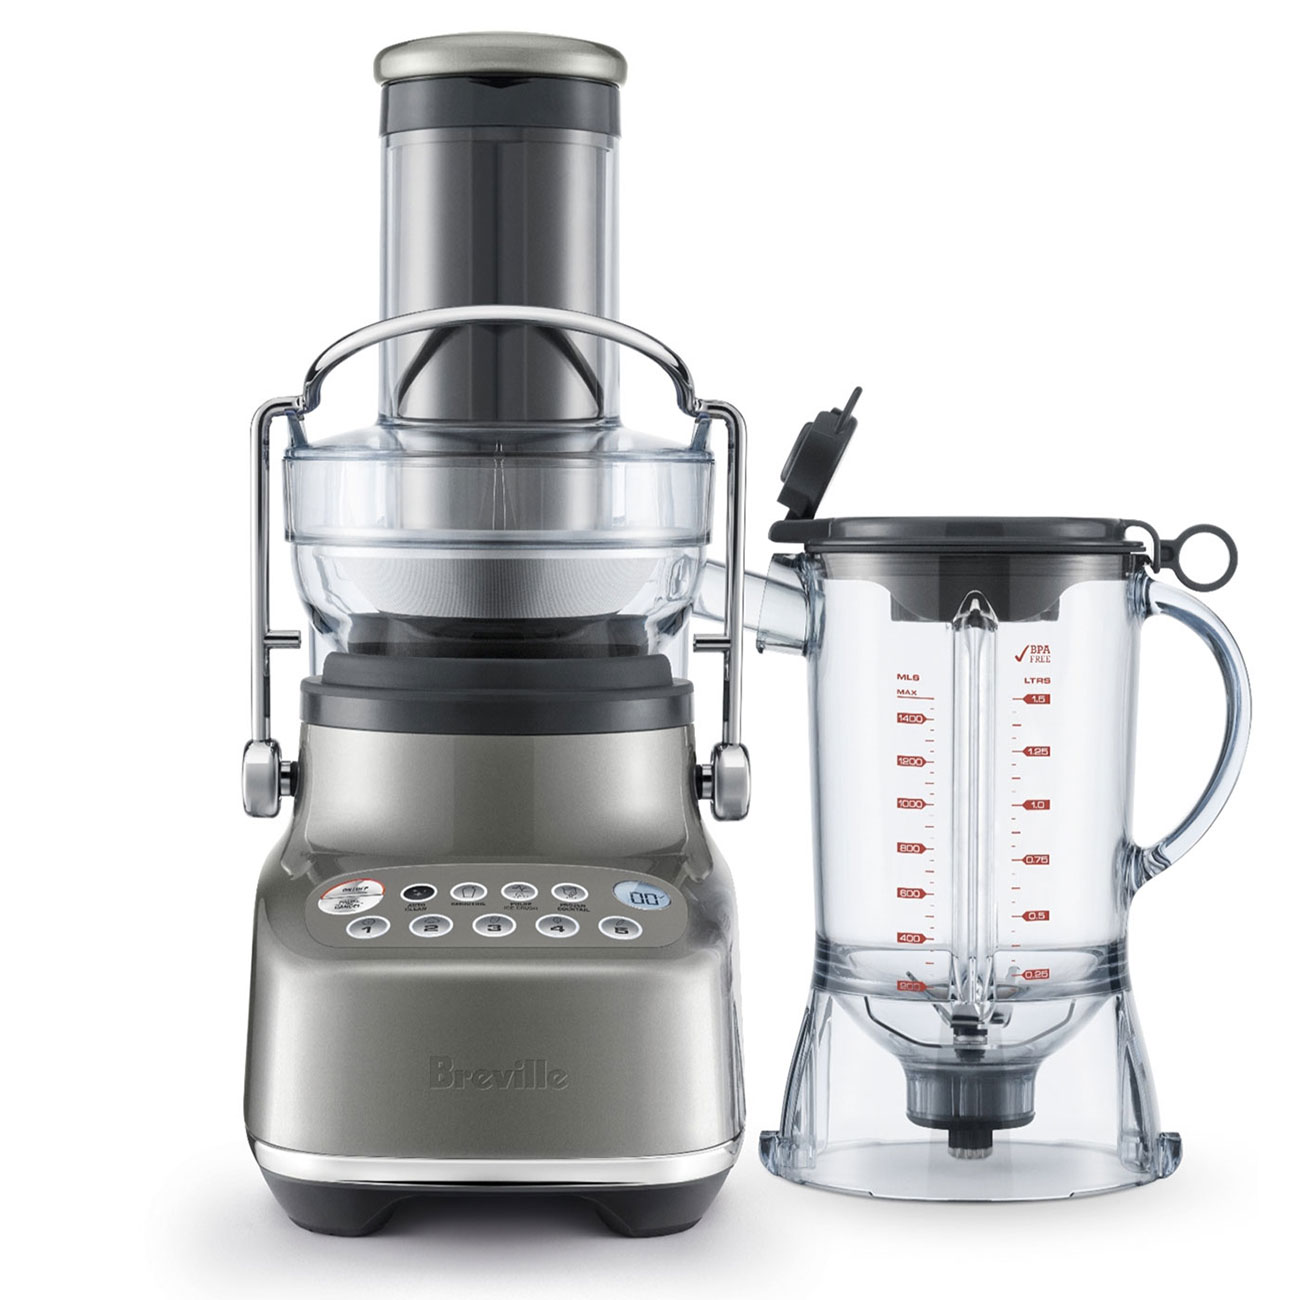 Top 5 Best Juicers Of 2020 And Why They Are Worth Buying